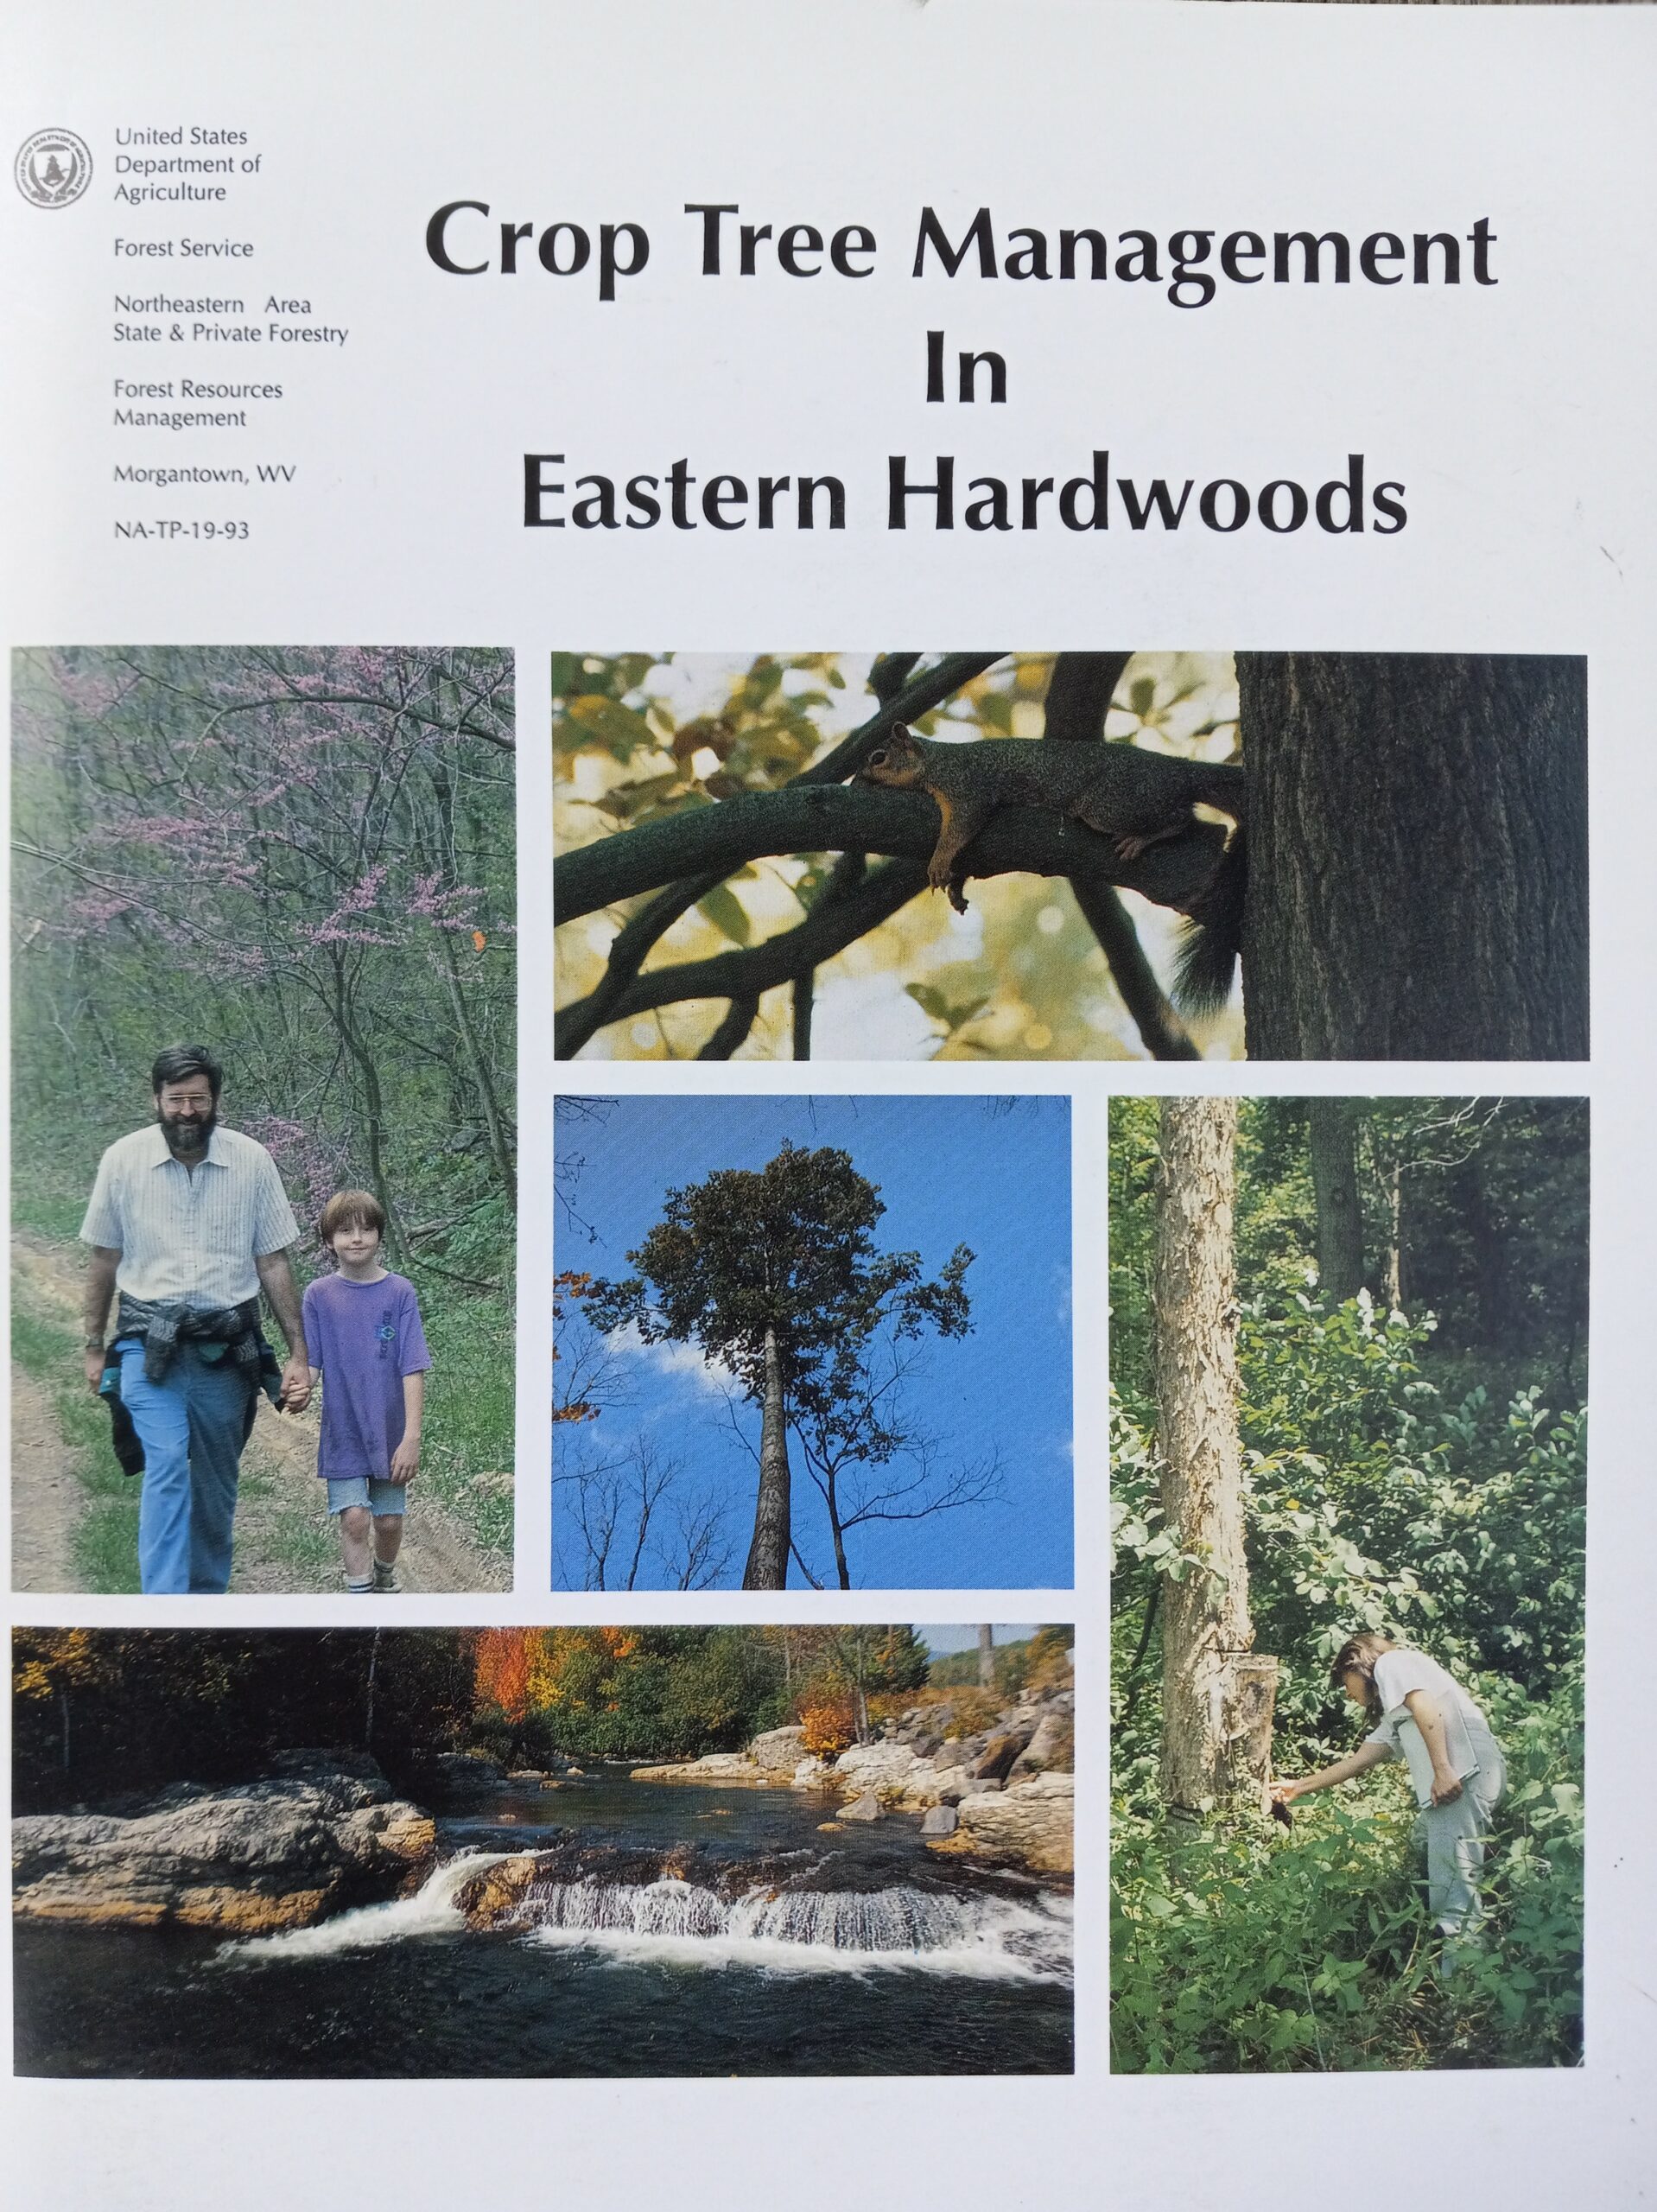 5 images of trees and people and a squirrel in the forest on the cover of "Crop Tree Management for Eastern Hardwoods" publication